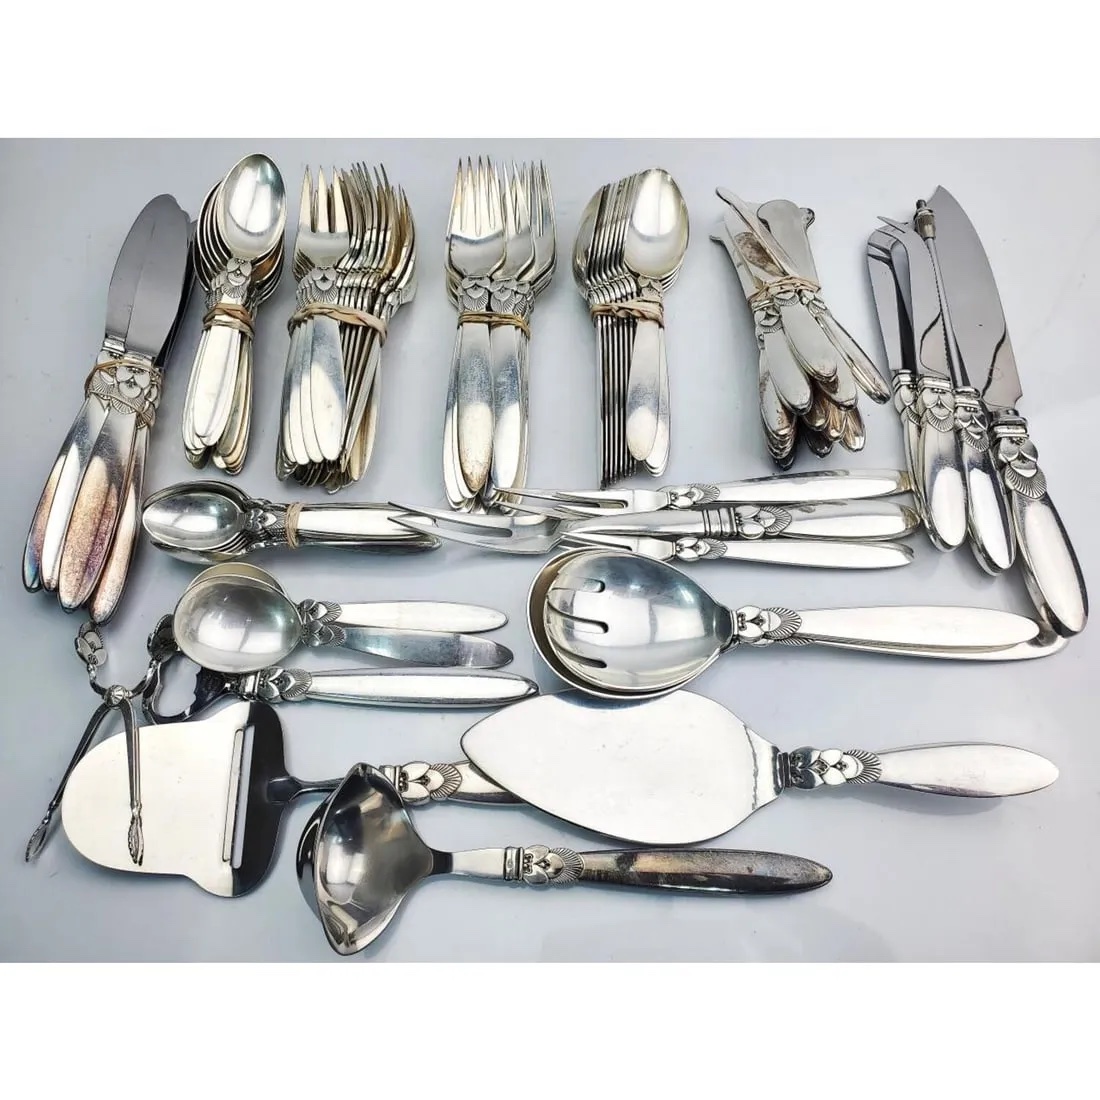 Georg Jensen Denmark Cactus sterling silverware set, estimated at $4,000-$6,000 at World Auction Gallery.